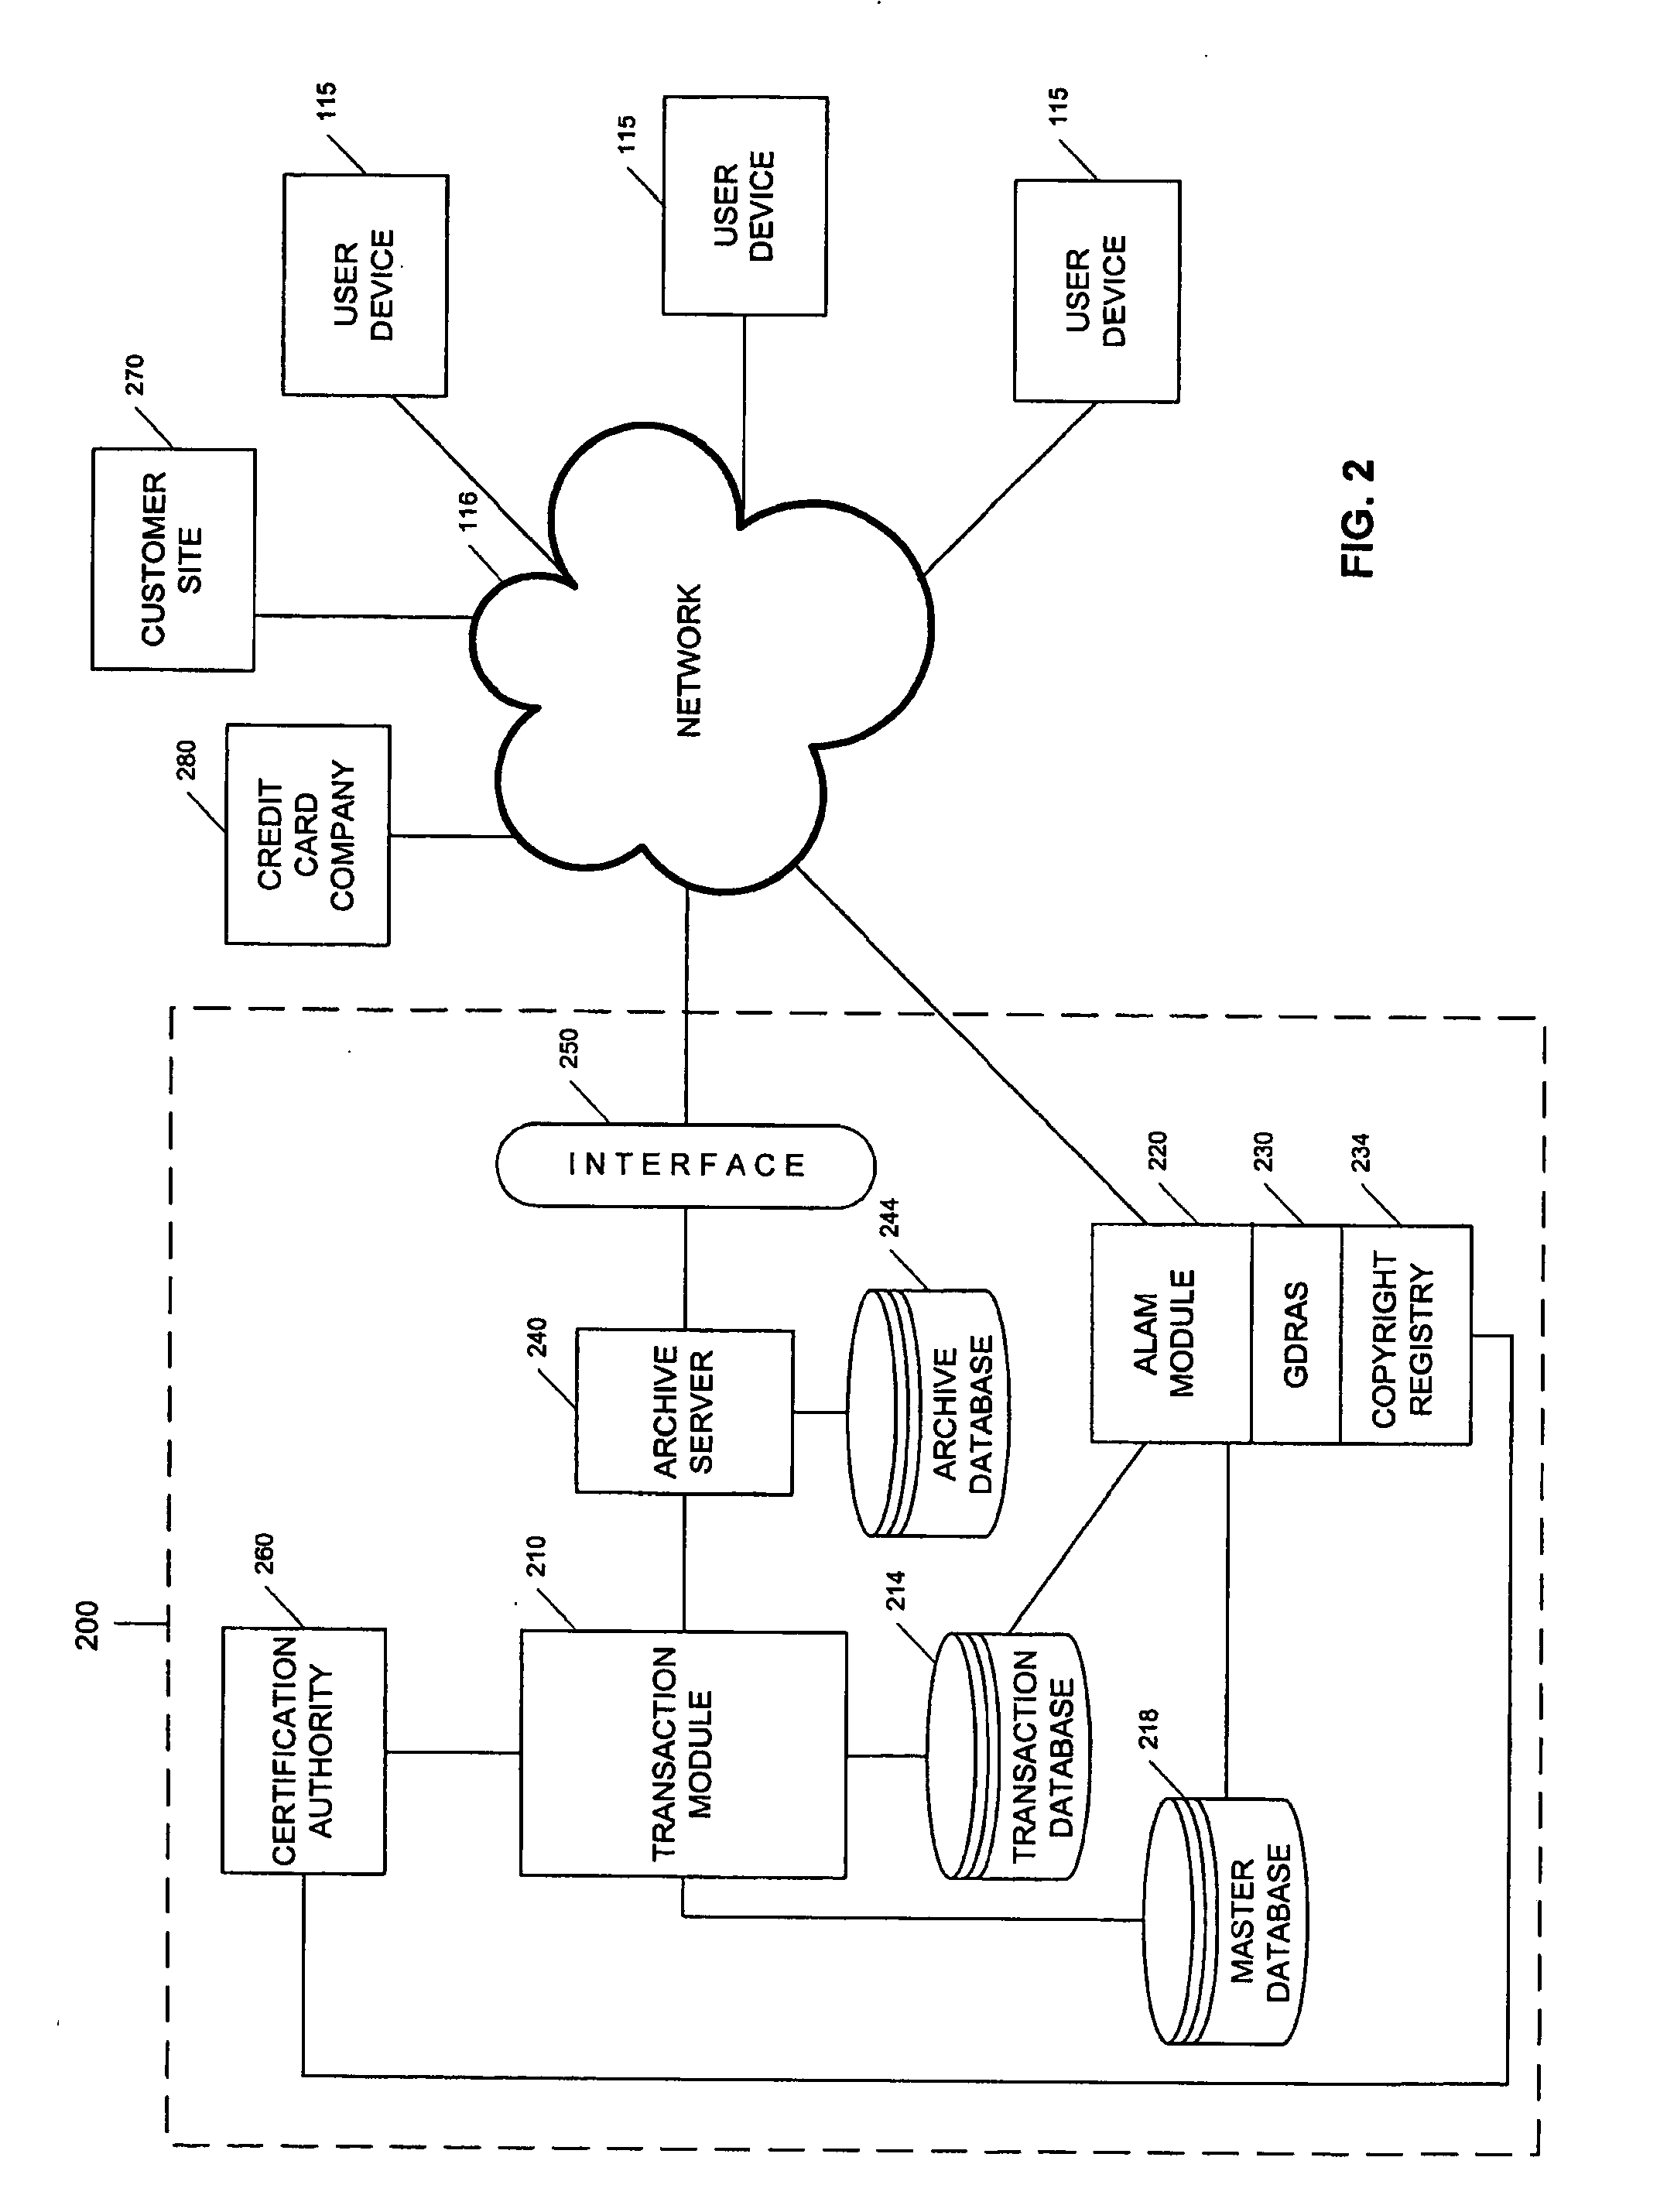 Network-based content distribution system